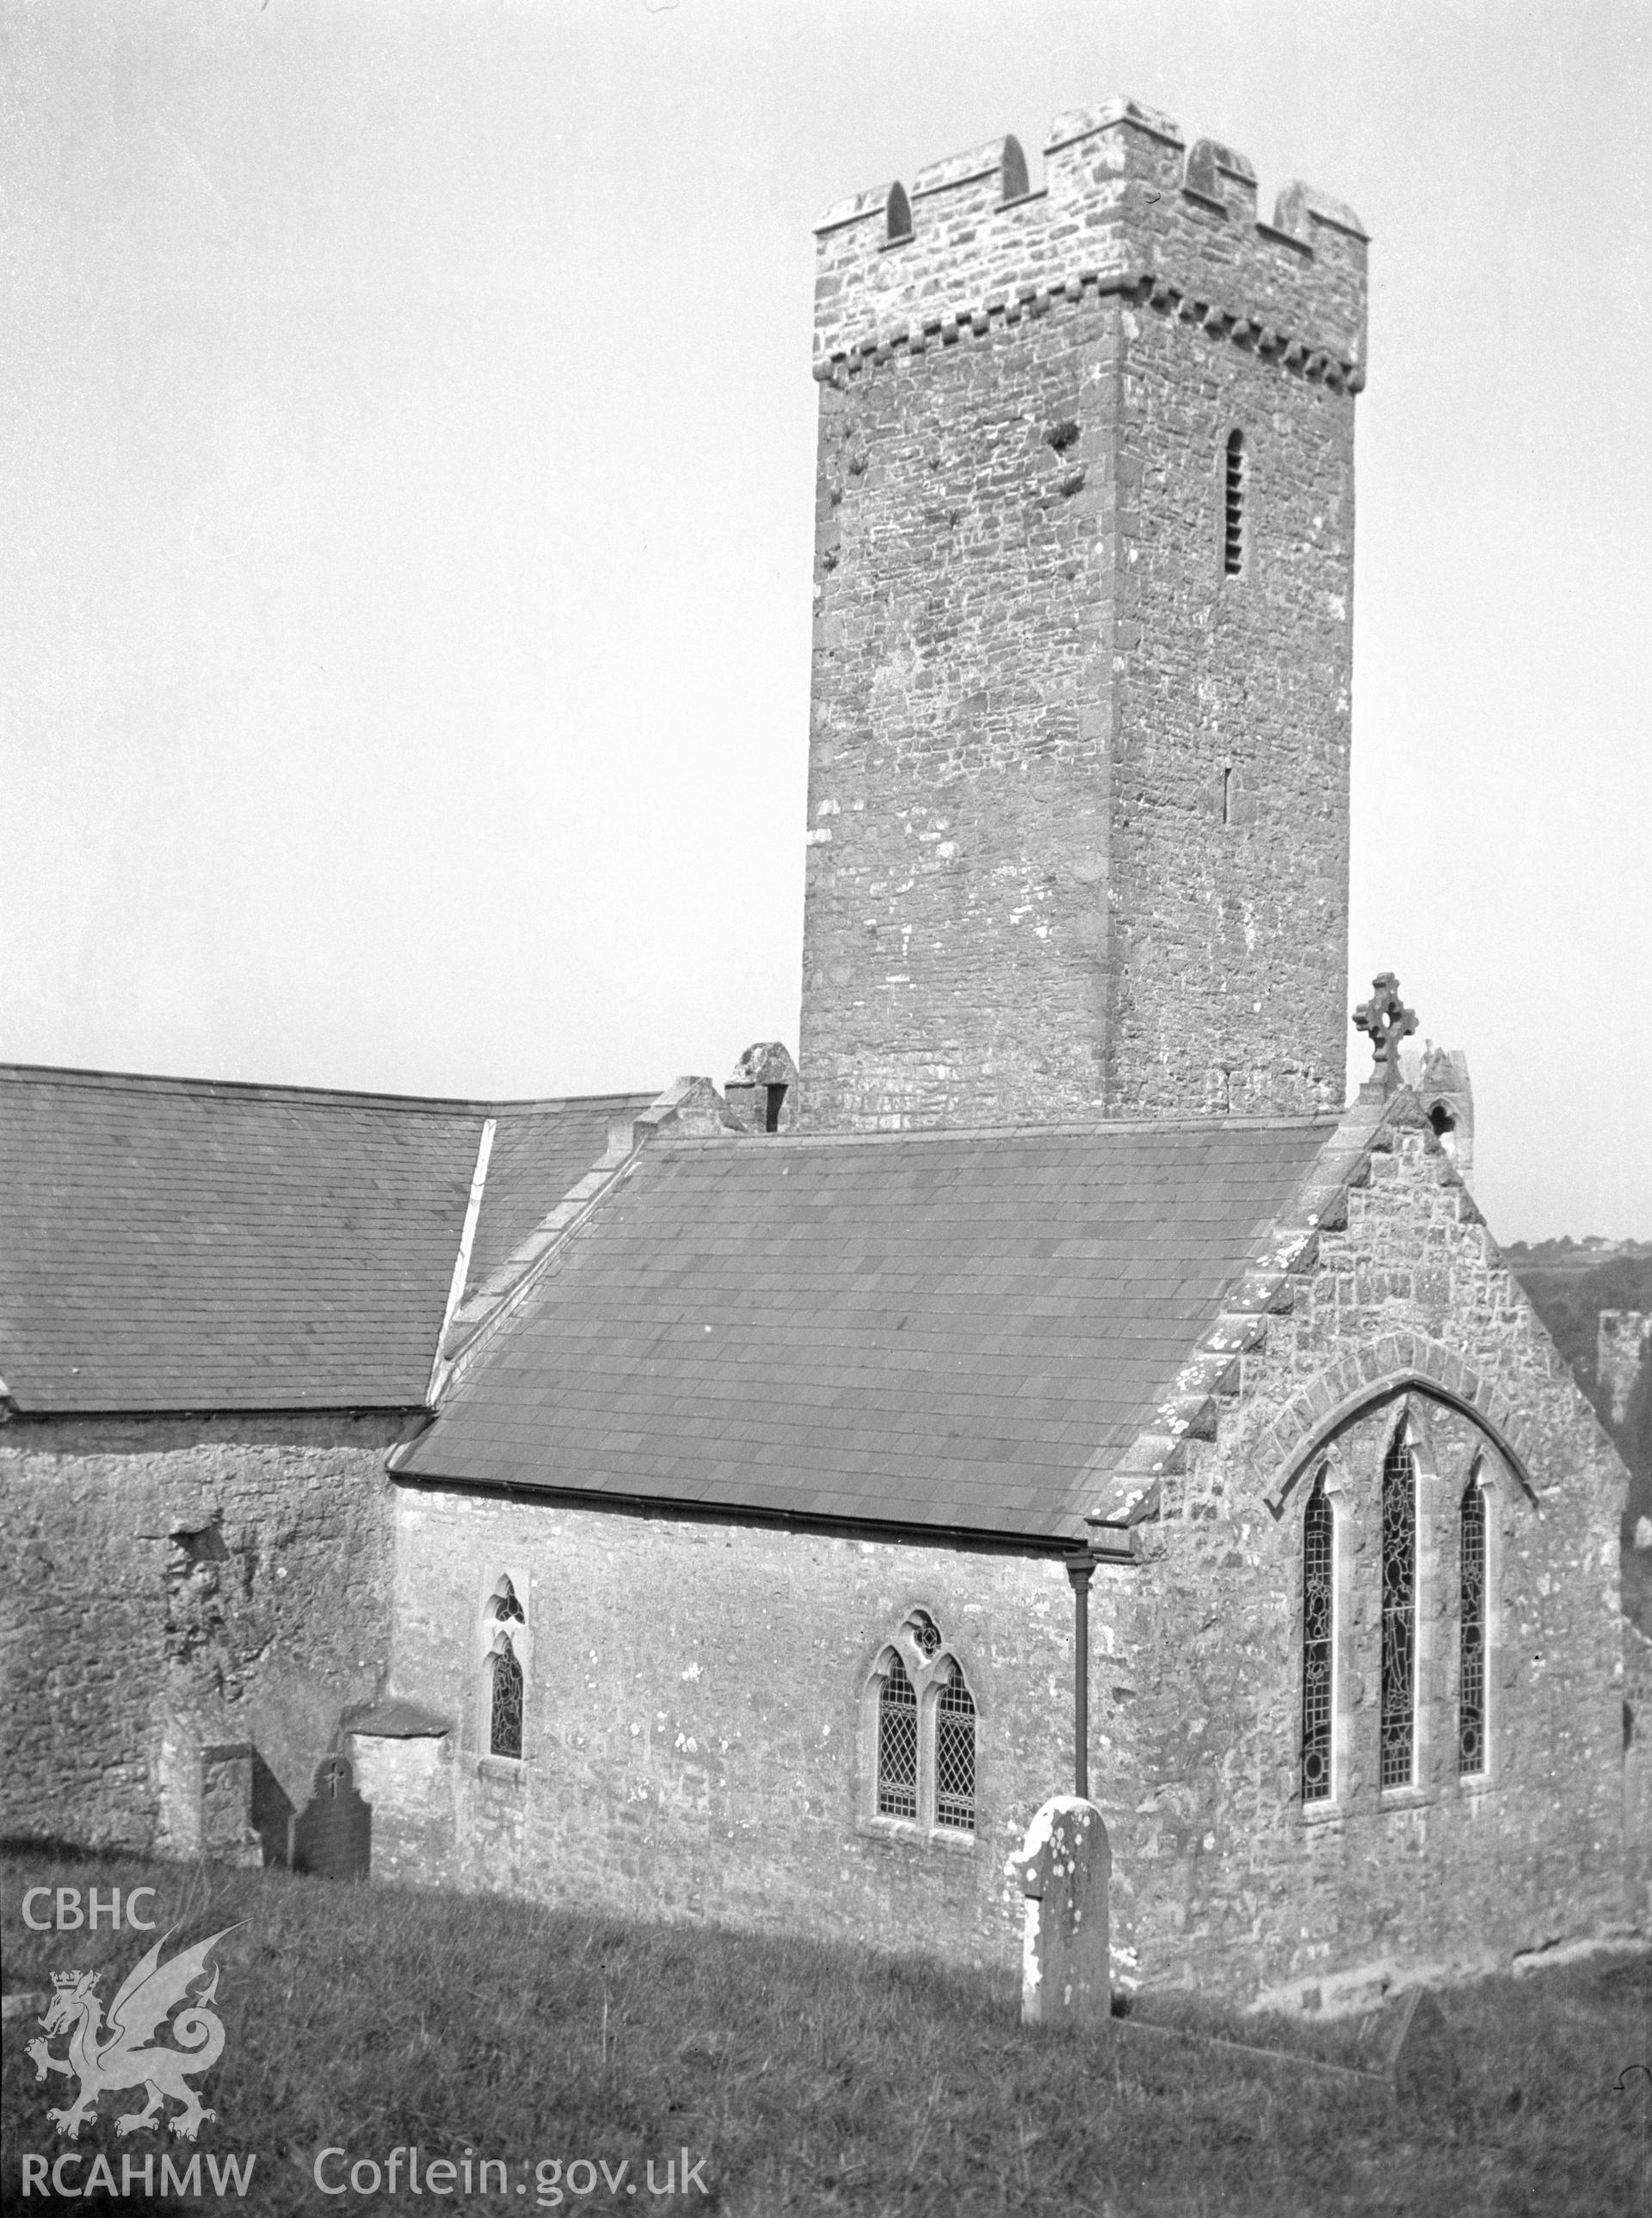 Digital copy of a nitrate negative showing exterior view of tower and east end of St James's Church, Manorbier. From the National Building Record Postcard Collection.